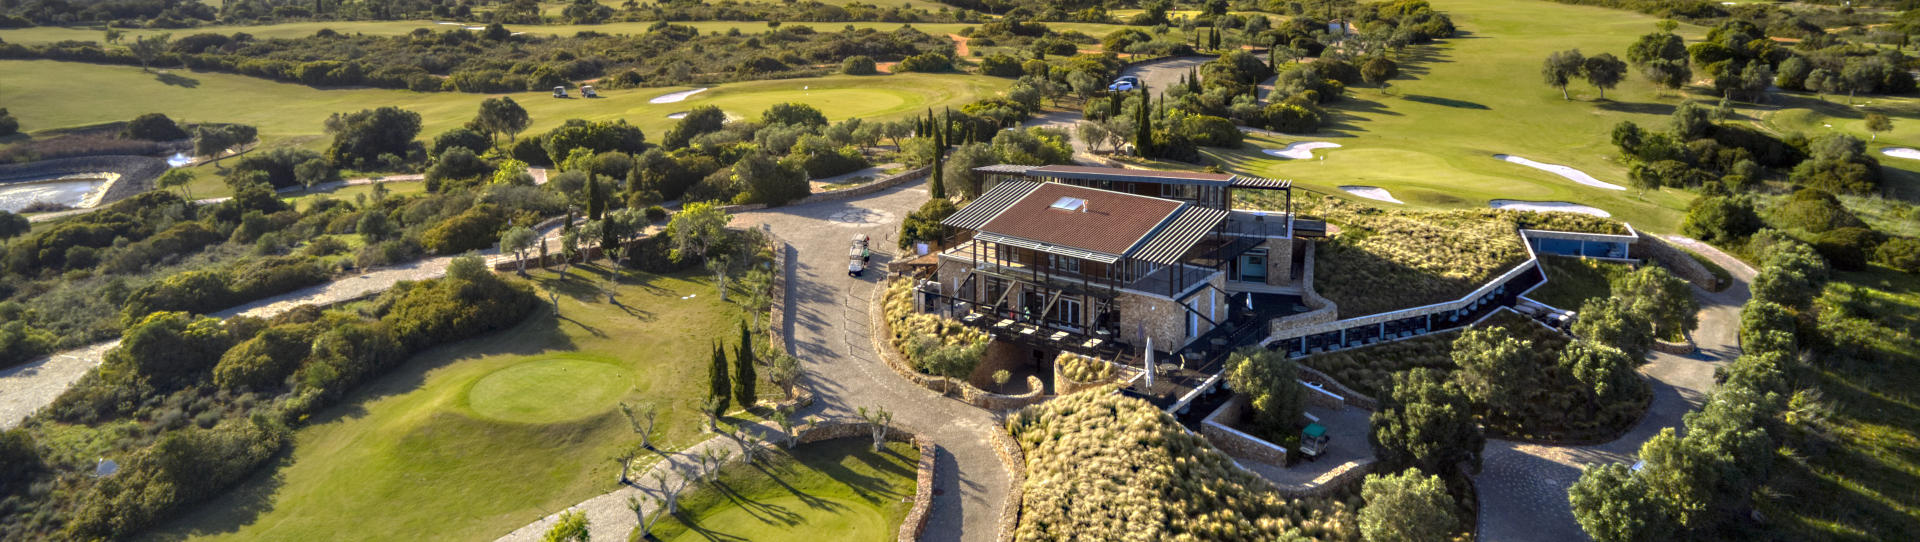 Portugal golf holidays - Espiche Duo Experience - Photo 2